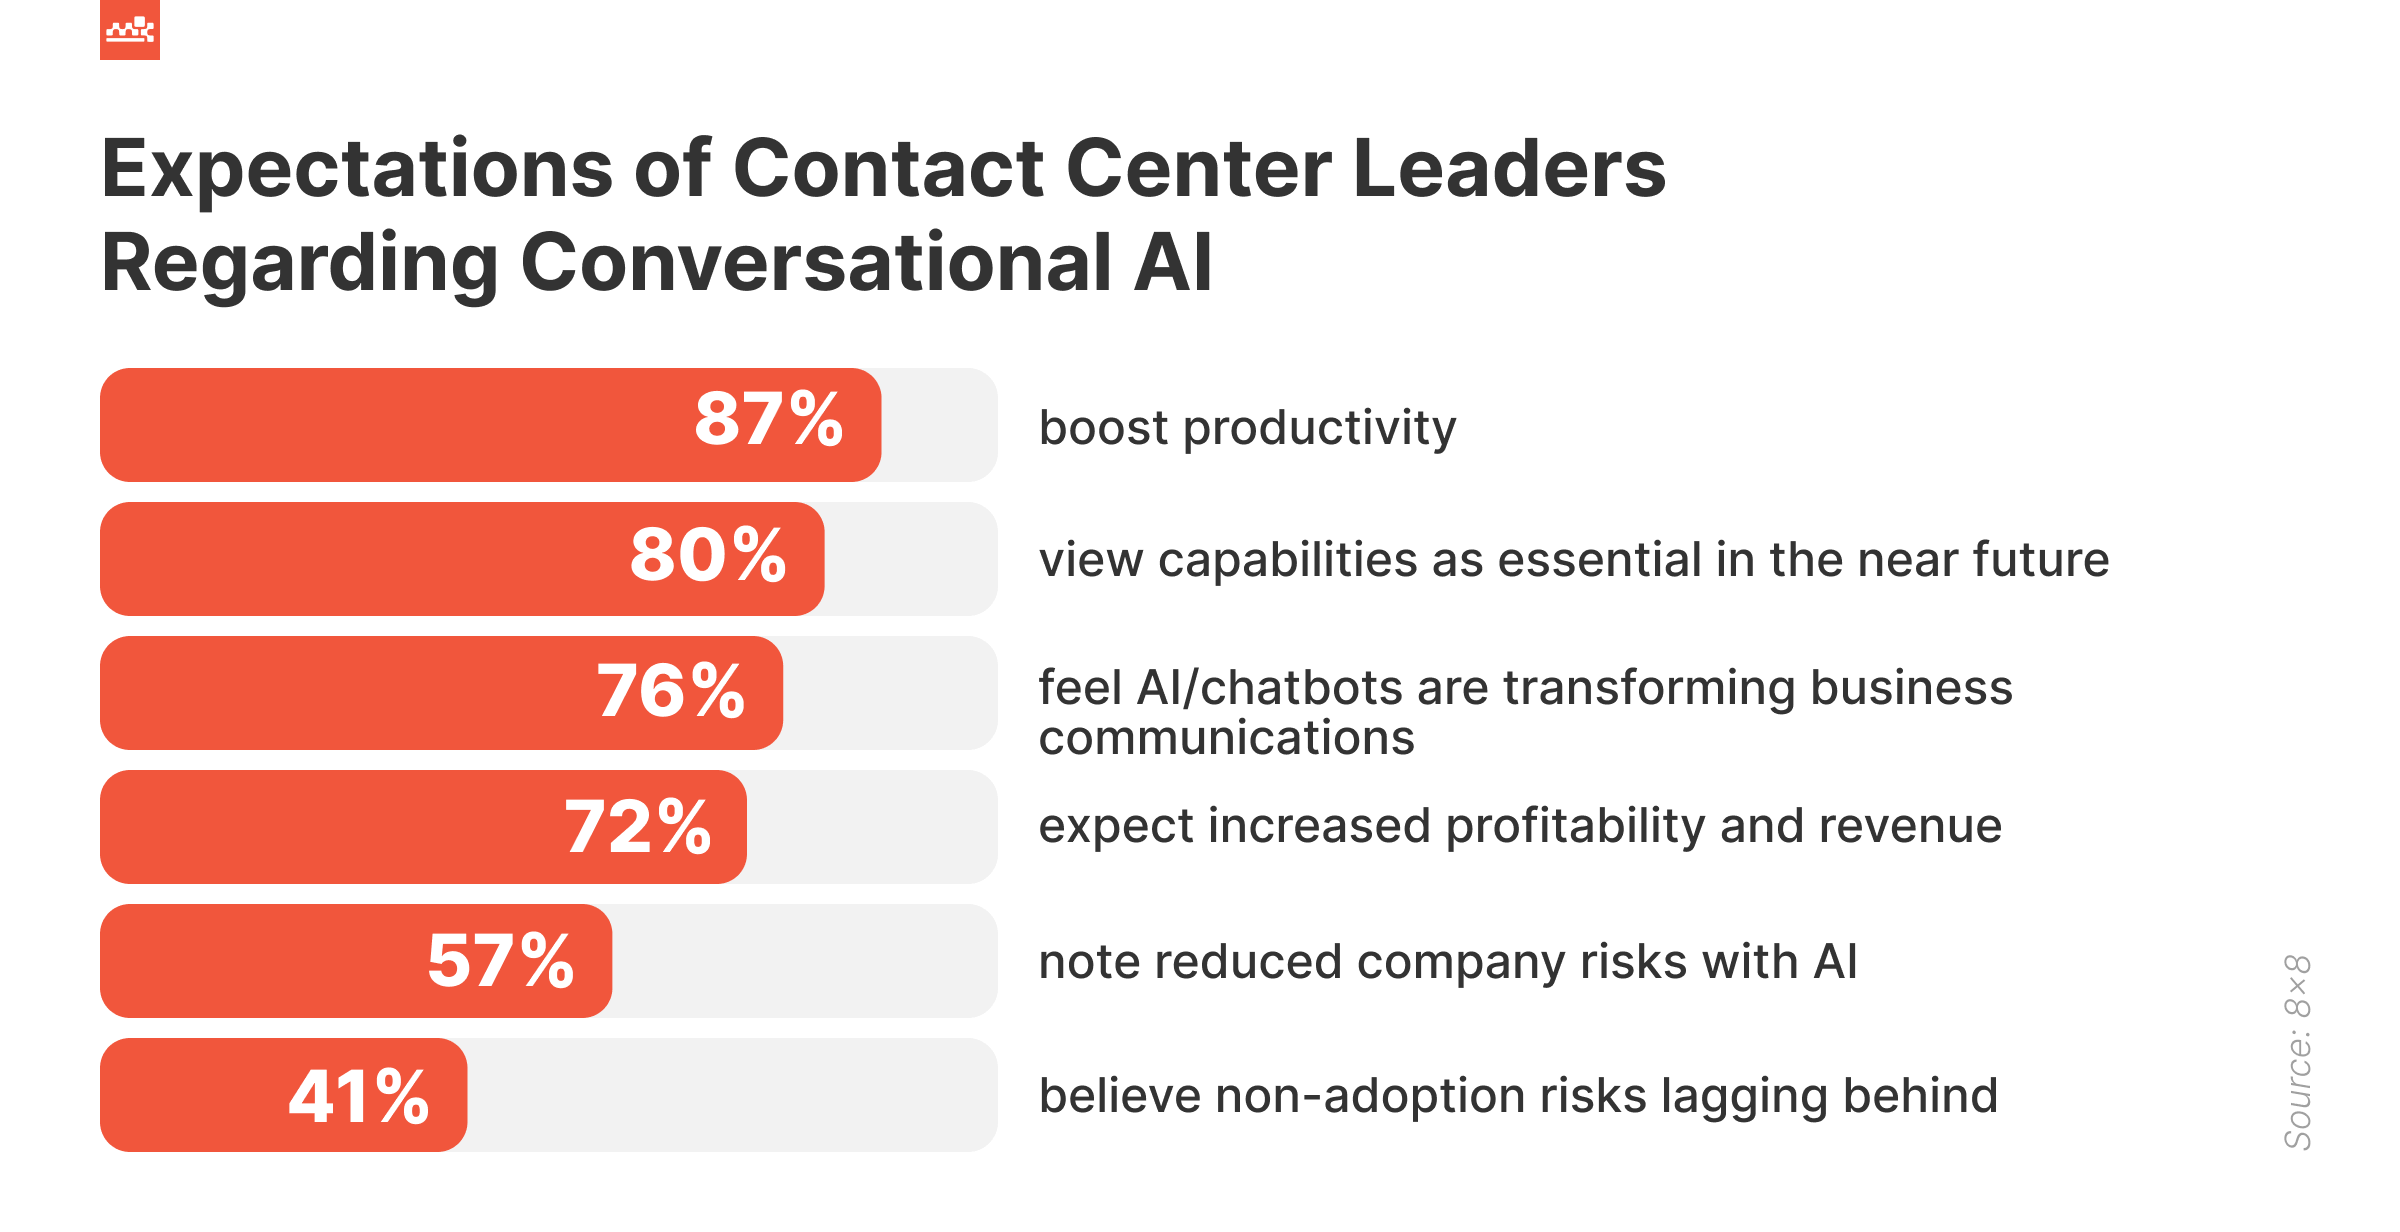 Contact Center Leaders Expectations of Conversational AI